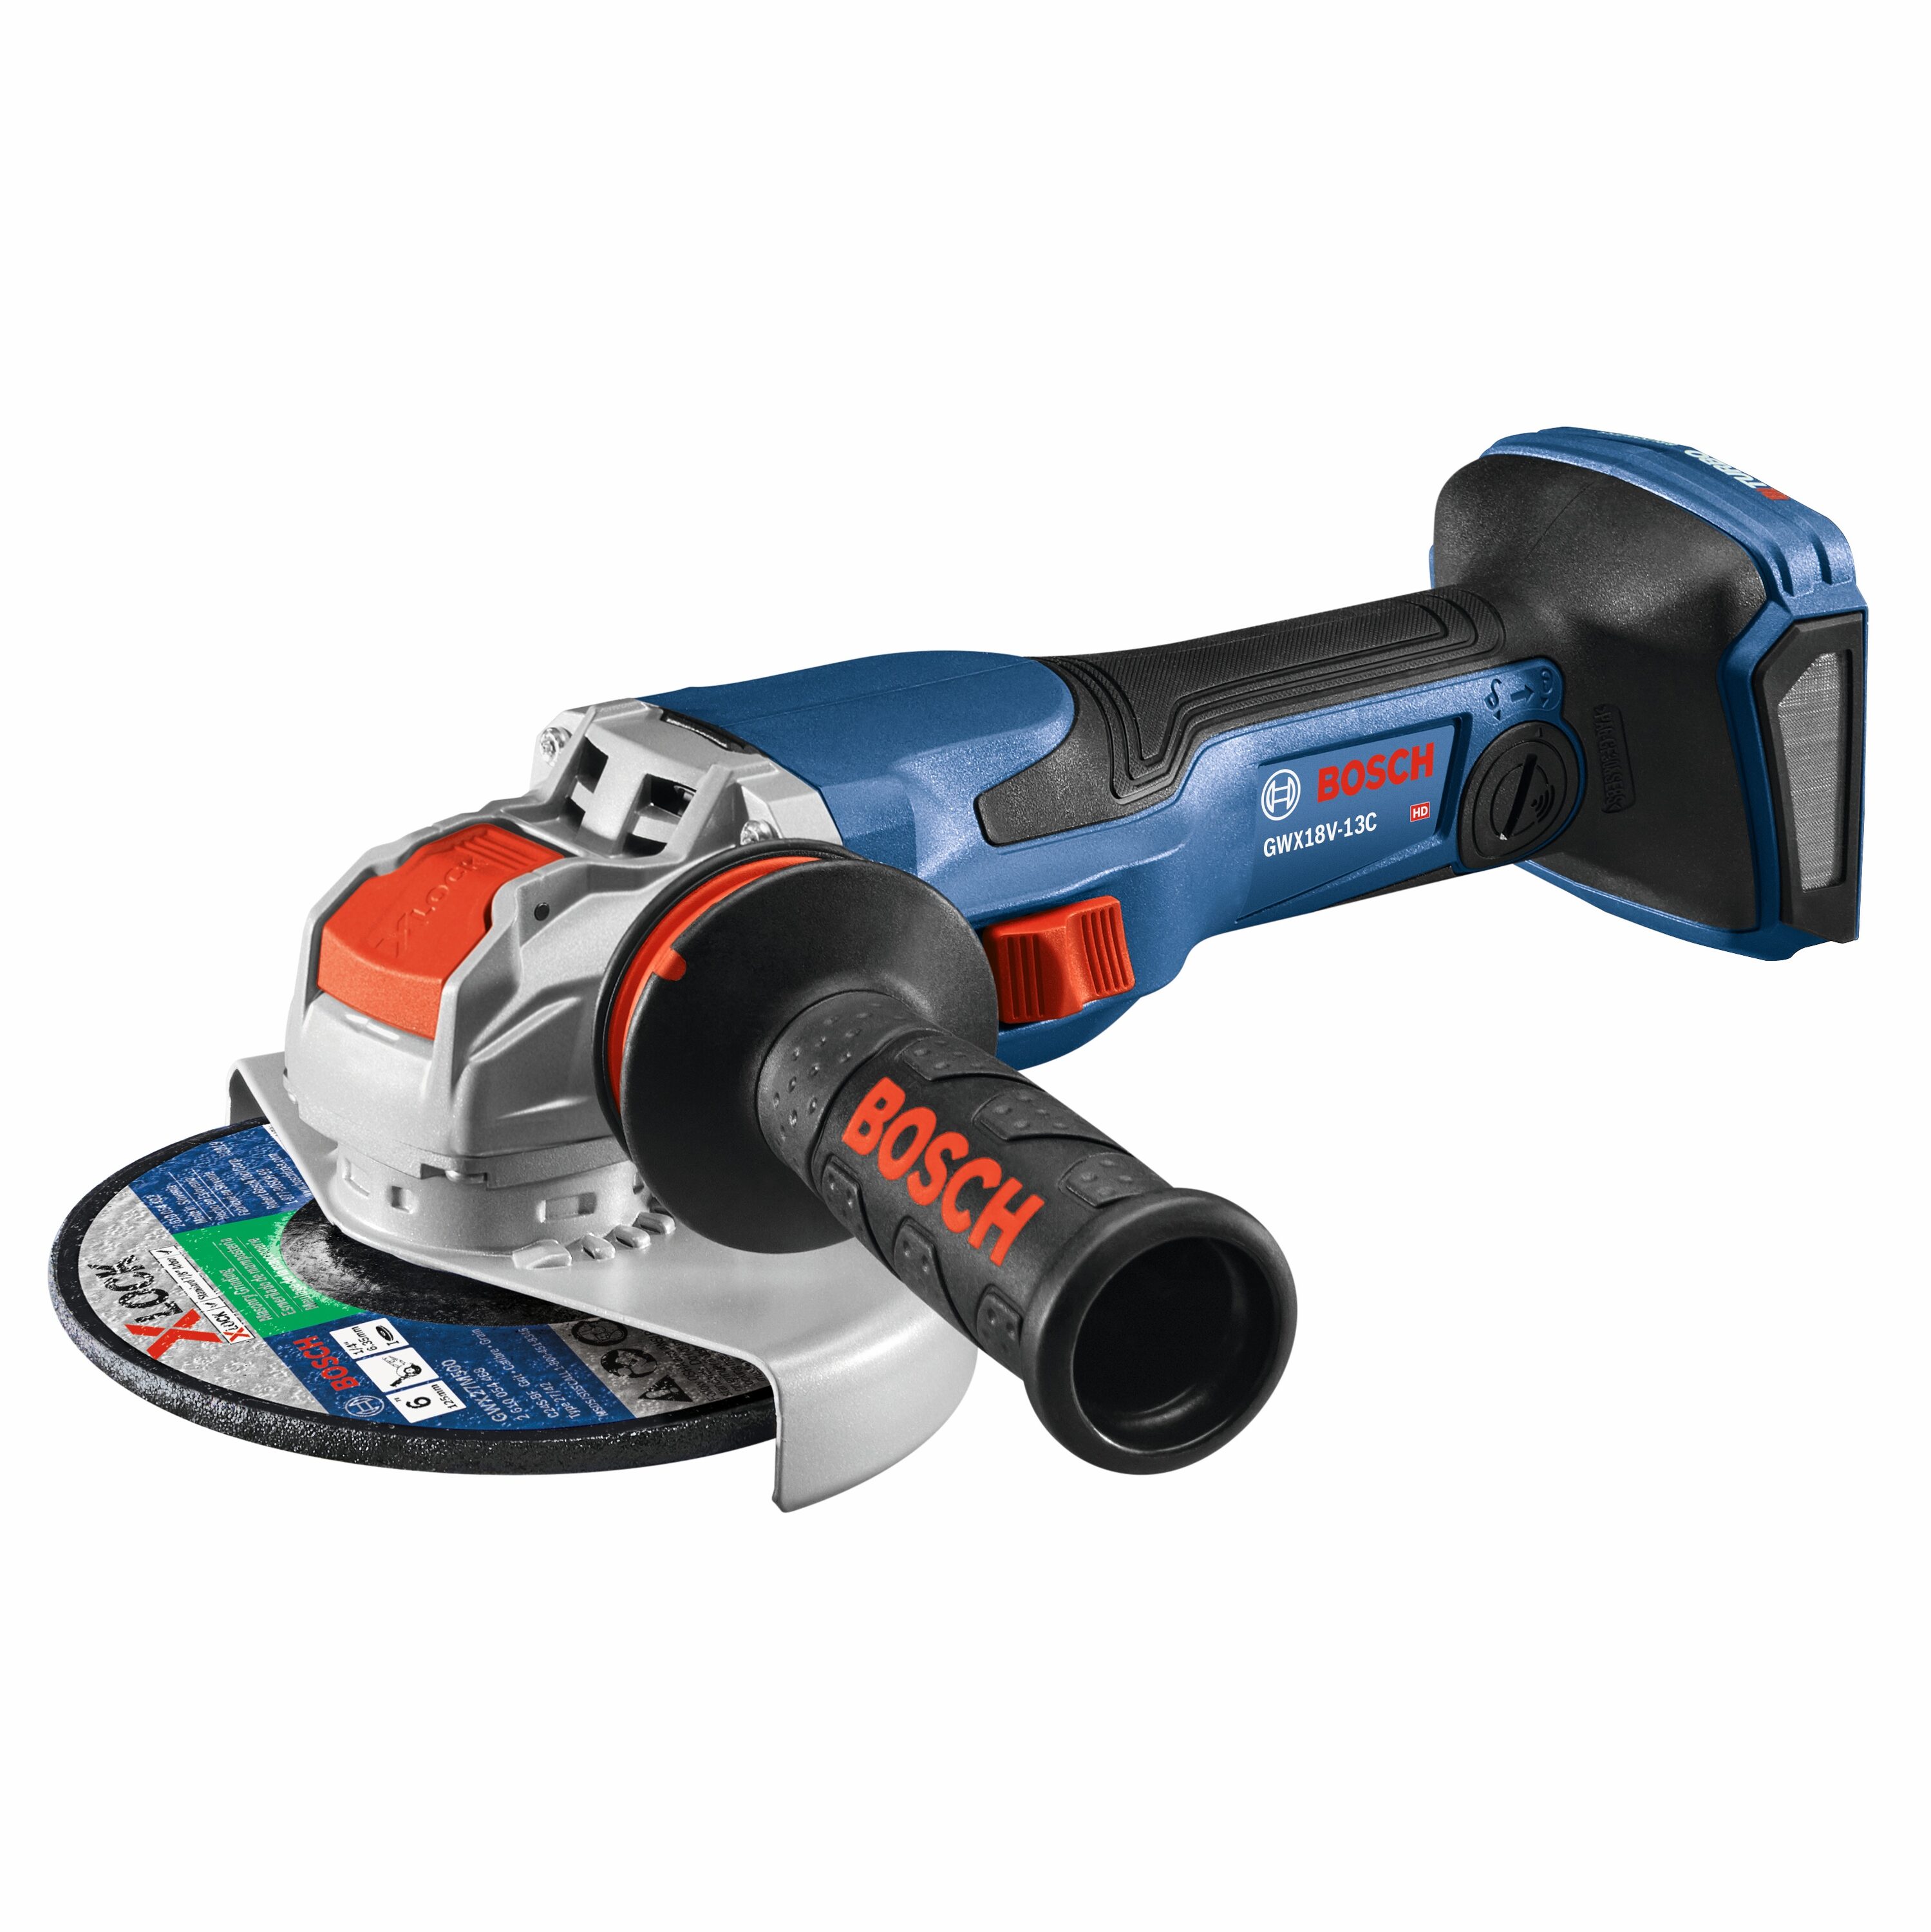 Is This a New Bosch 12V Max Brushless Cut-Off Tool or Angle Grinder?